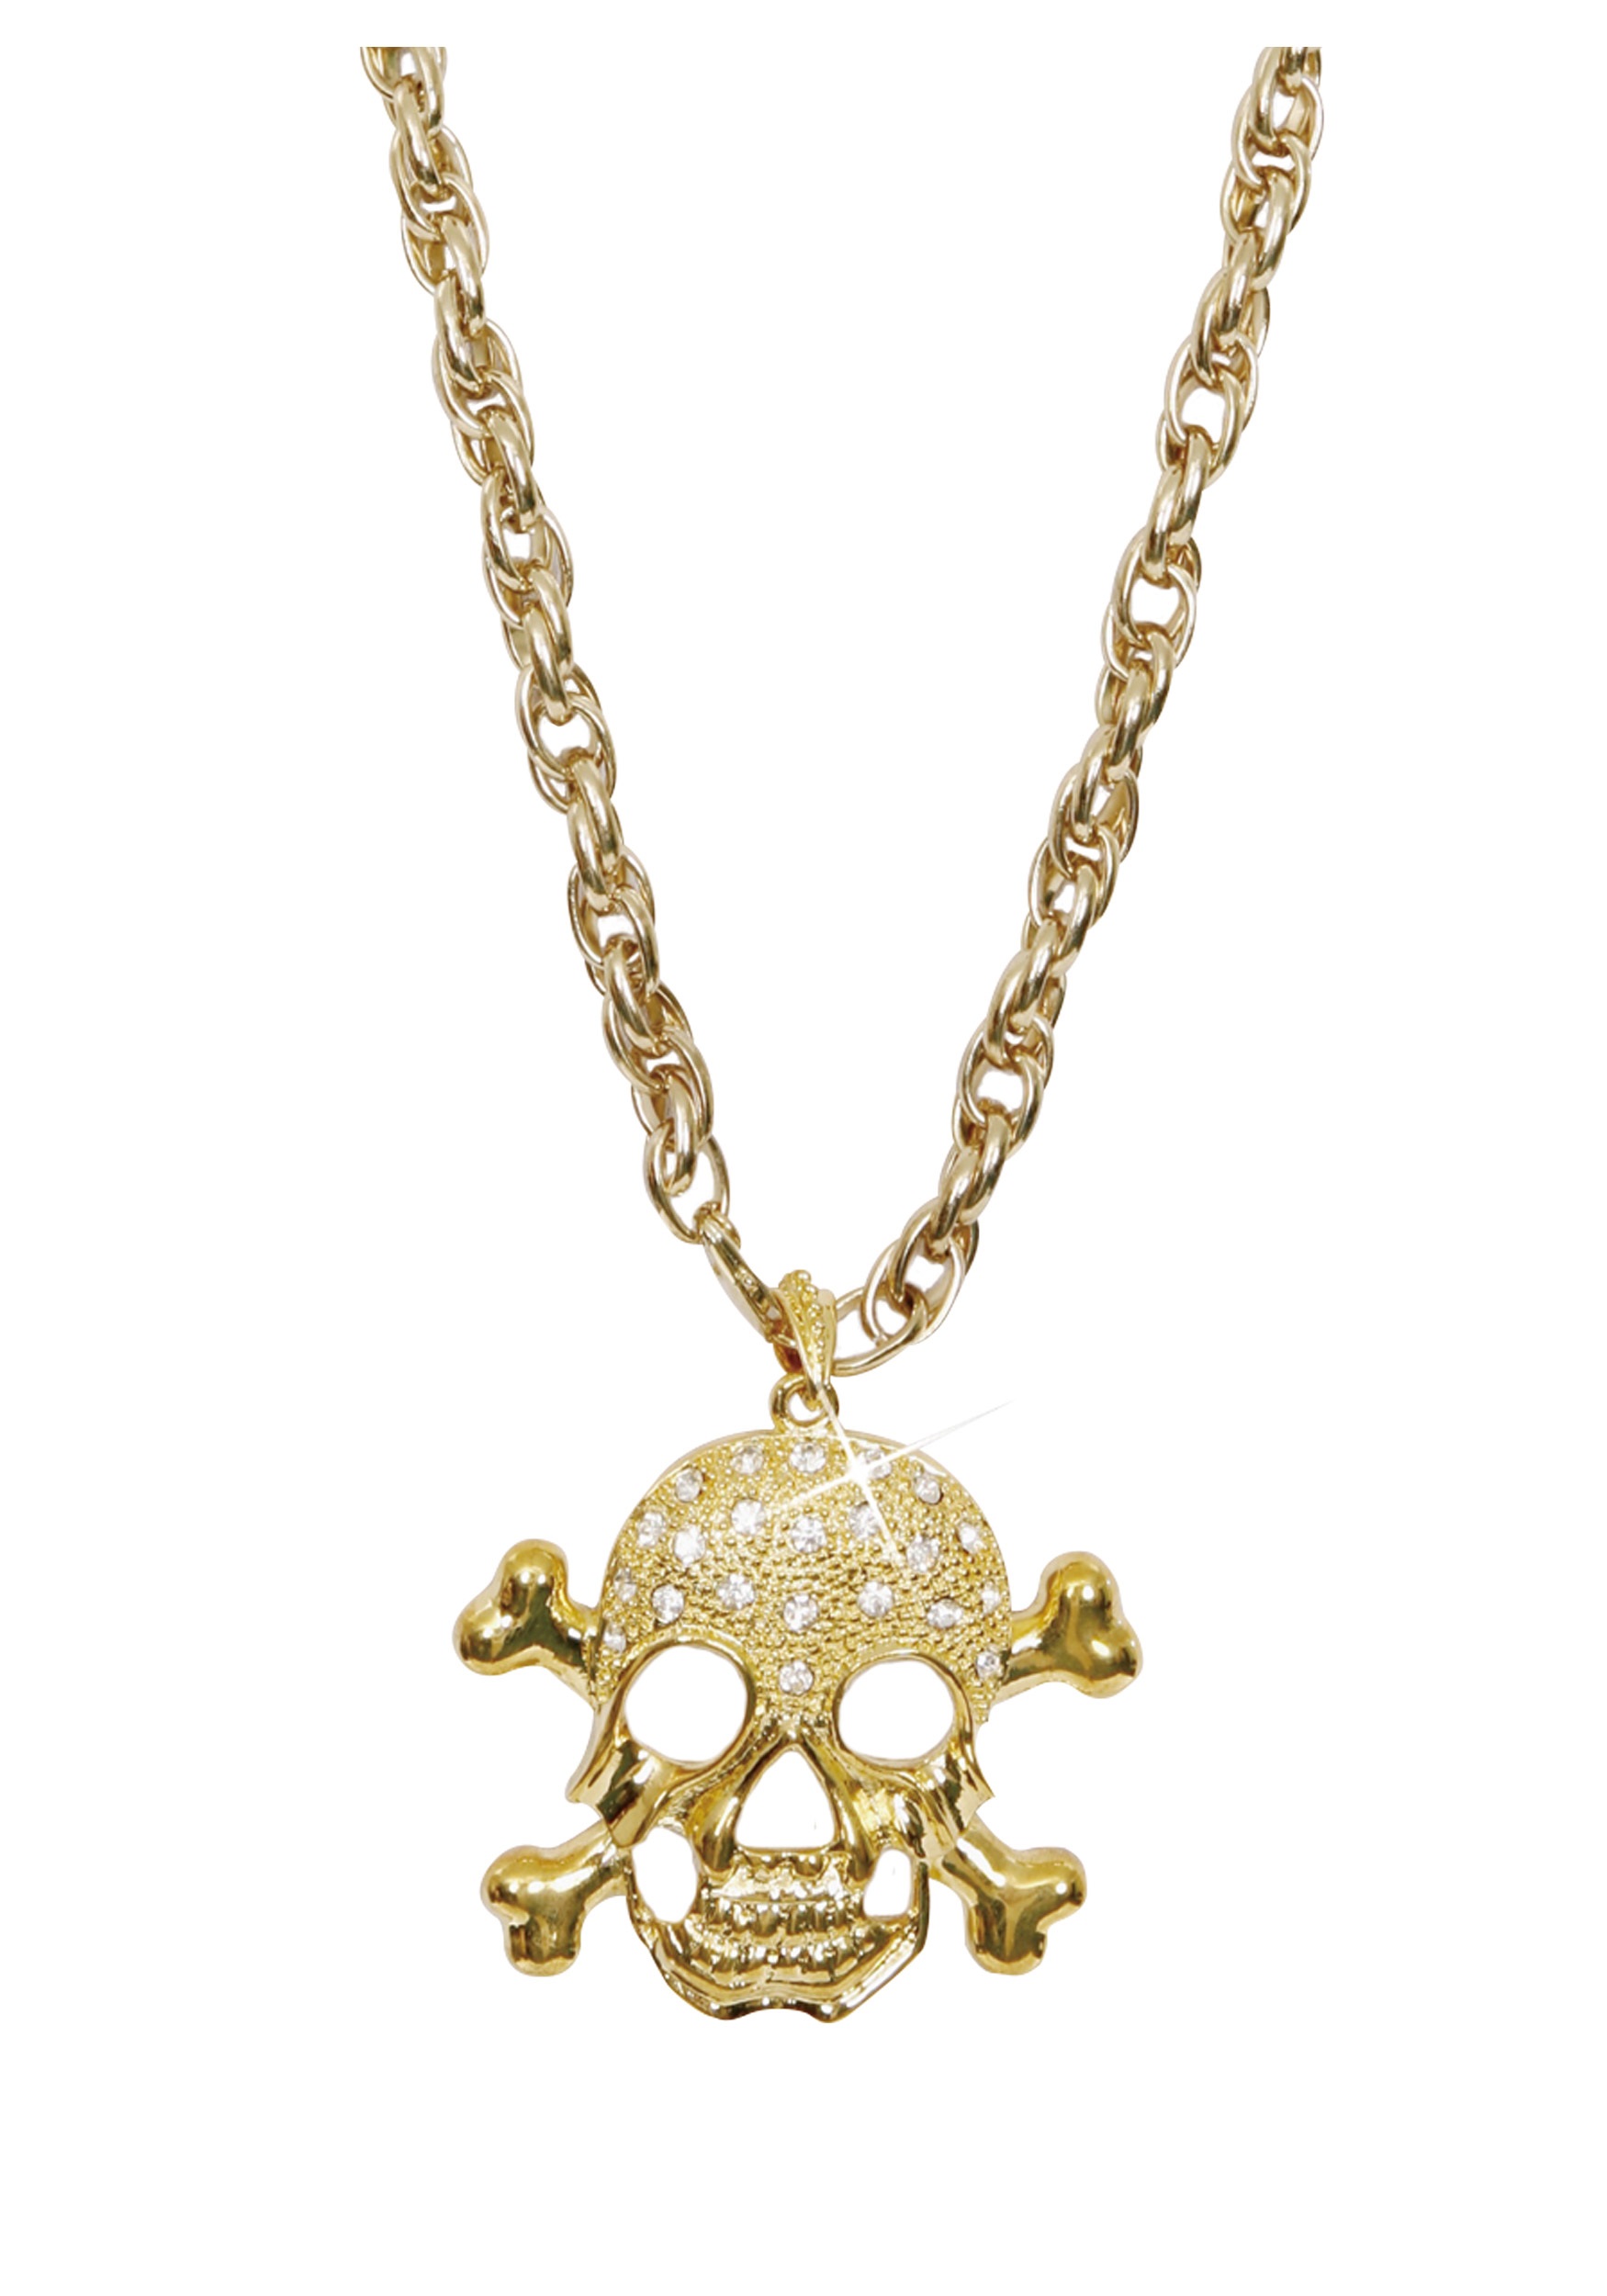 Pirate Gold Necklace